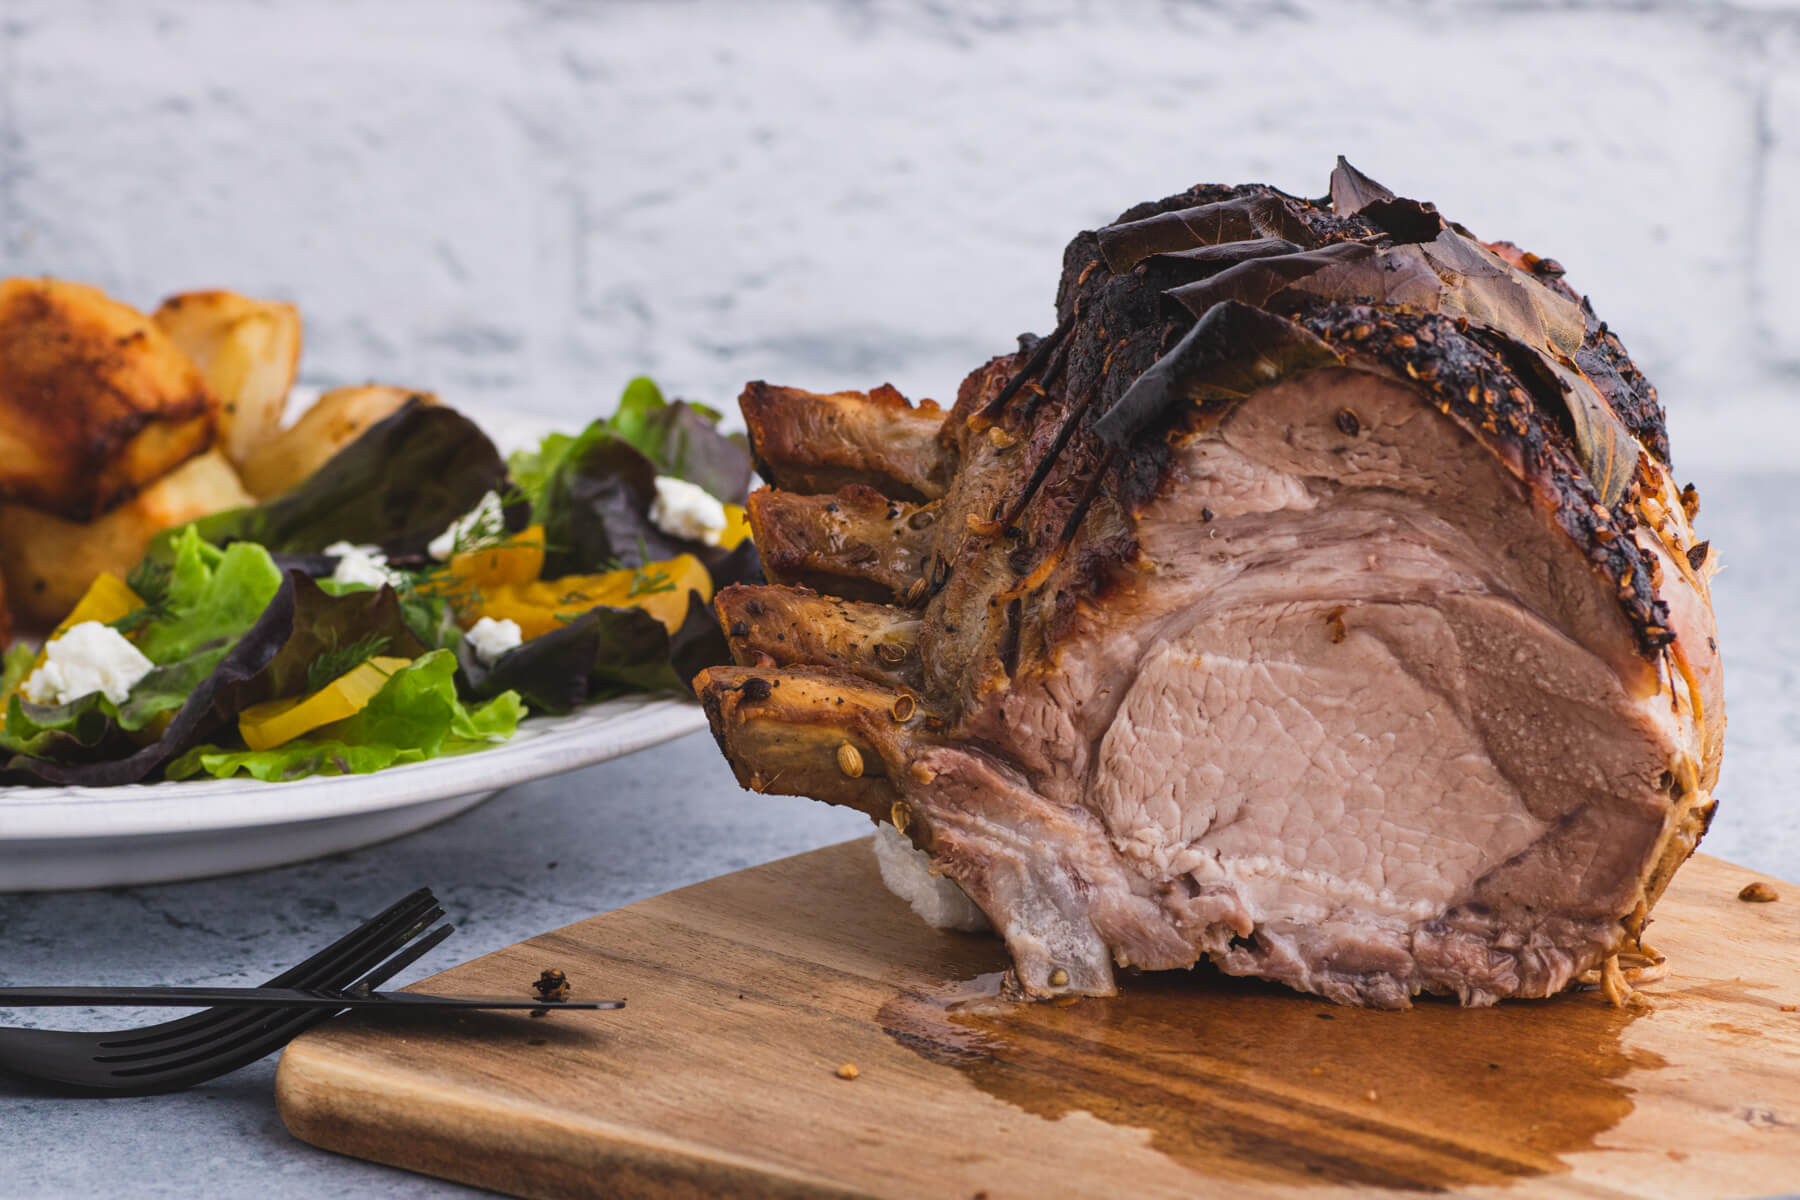 A pork rib roast with a slice taken out sits beside a dinner plate full of sliced pork, potatoes, and salad.